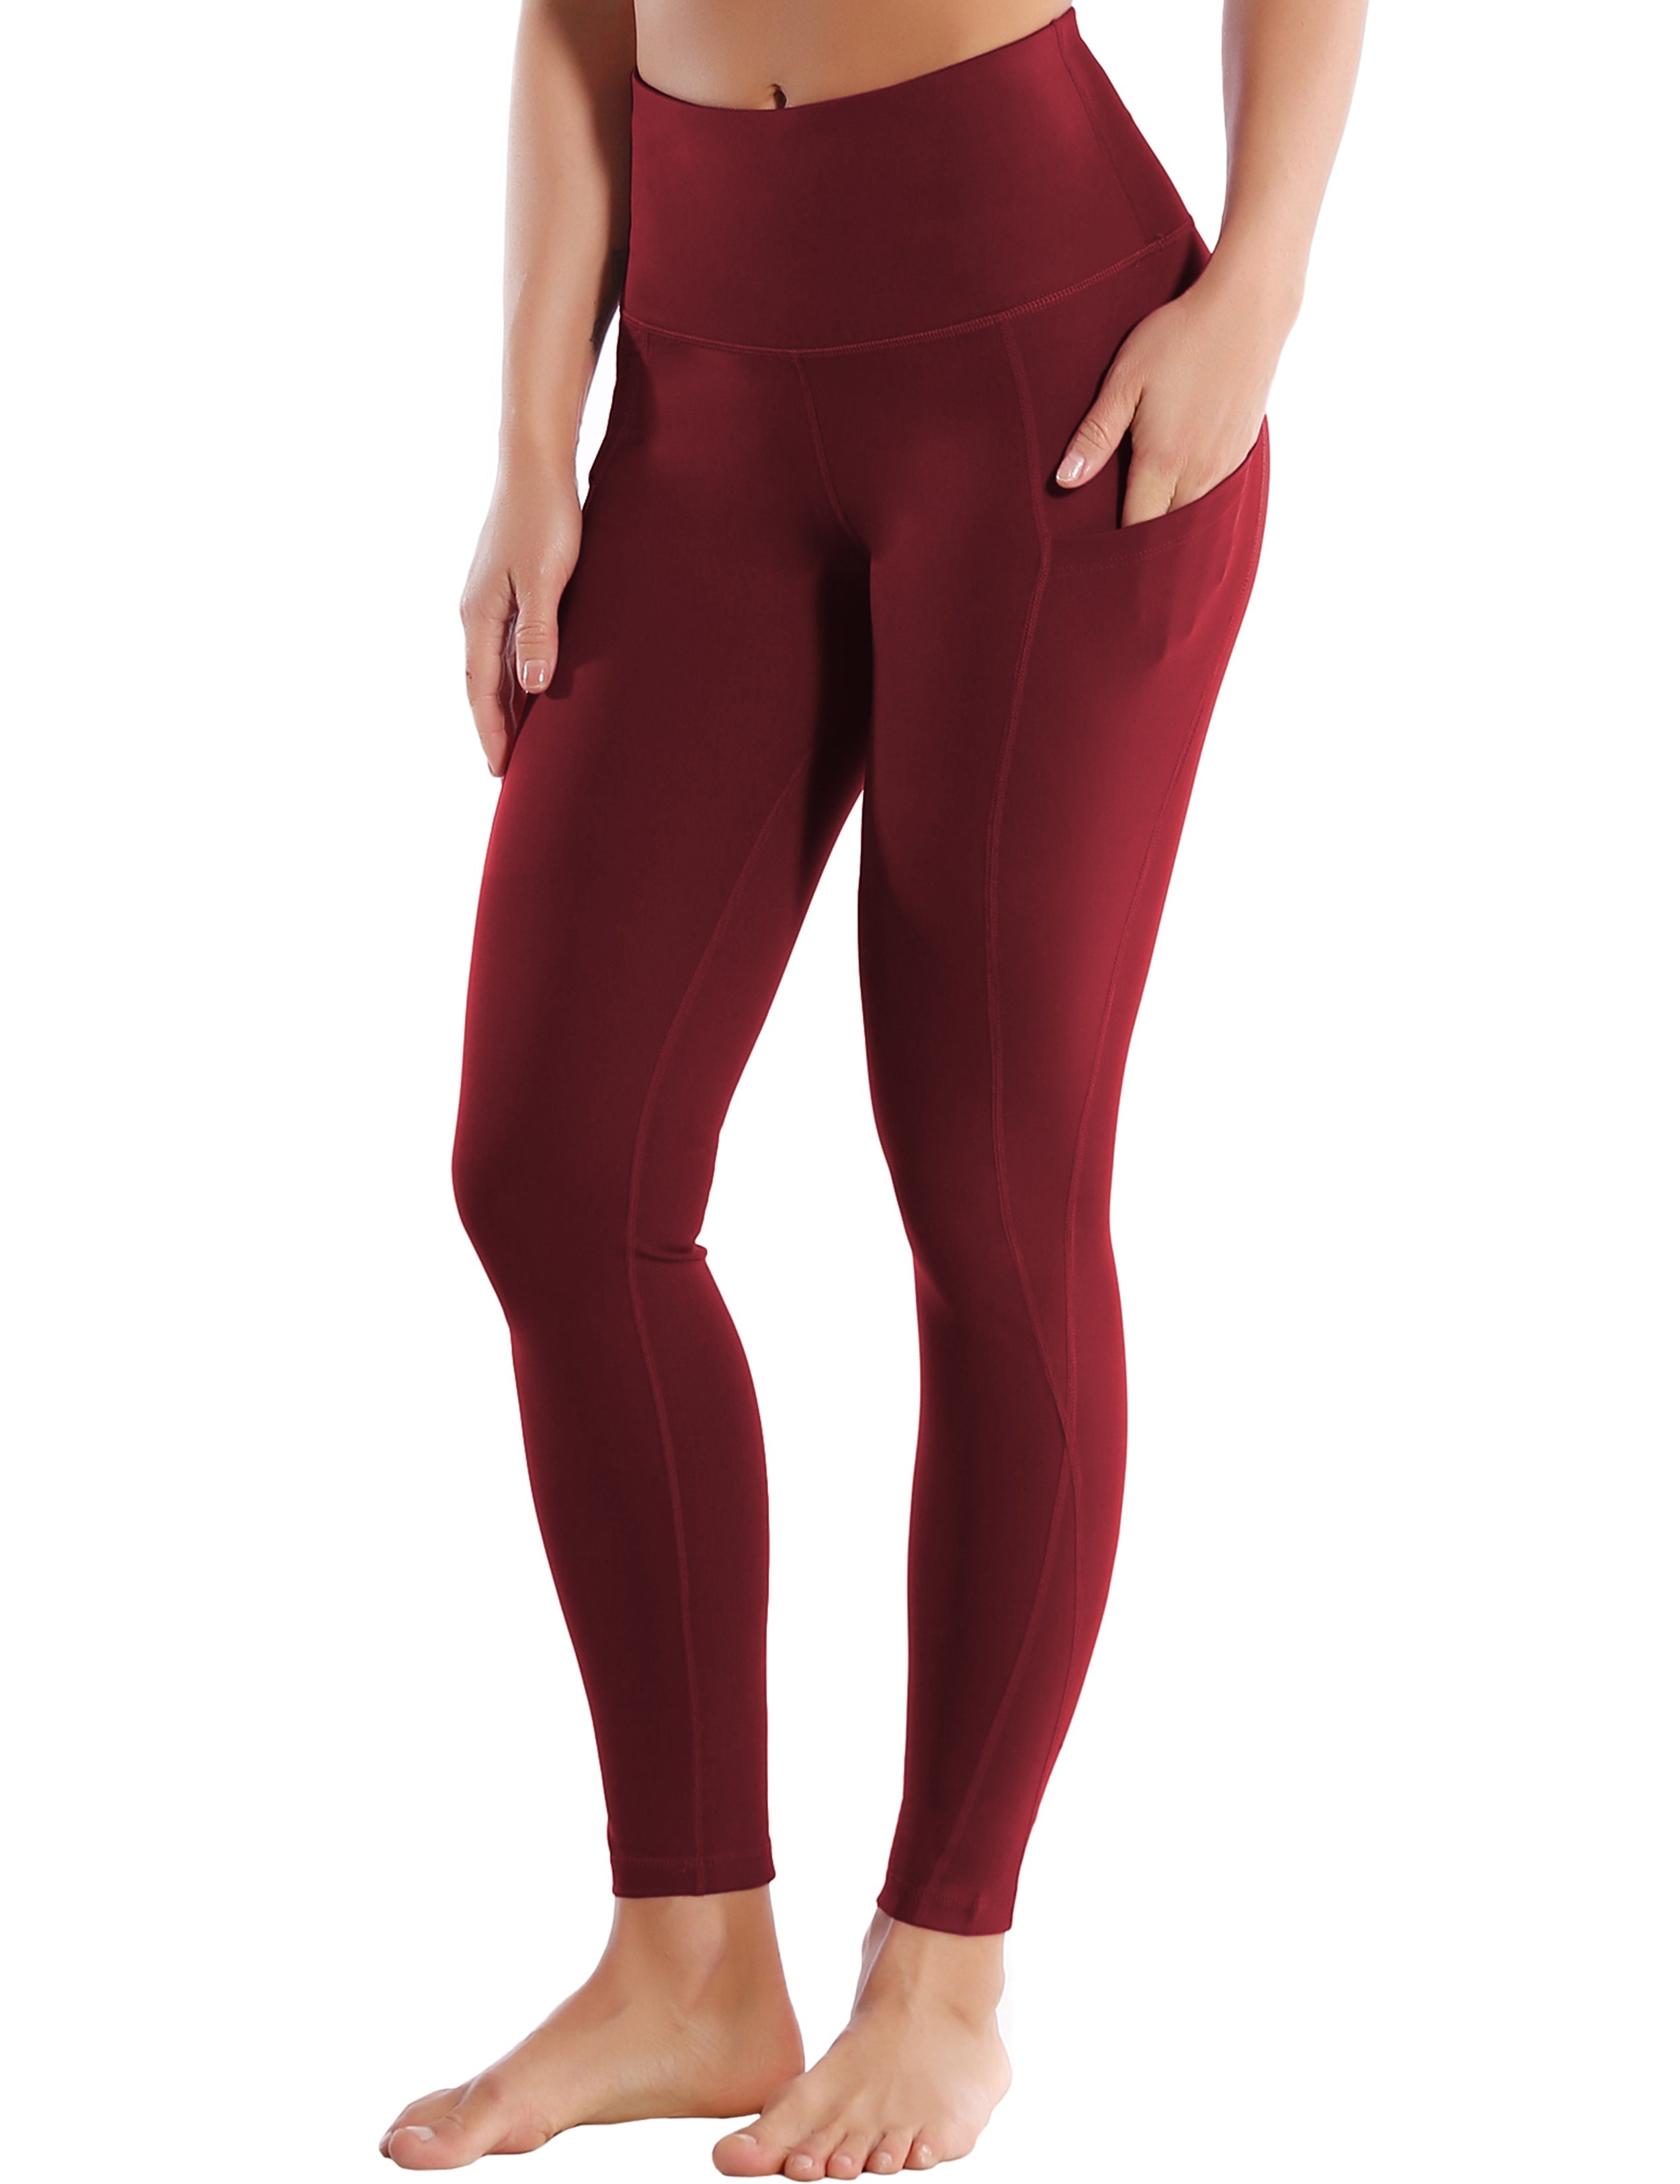 High Waist Side Pockets Biking Pants cherryred 75% Nylon, 25% Spandex Fabric doesn't attract lint easily 4-way stretch No see-through Moisture-wicking Tummy control Inner pocket